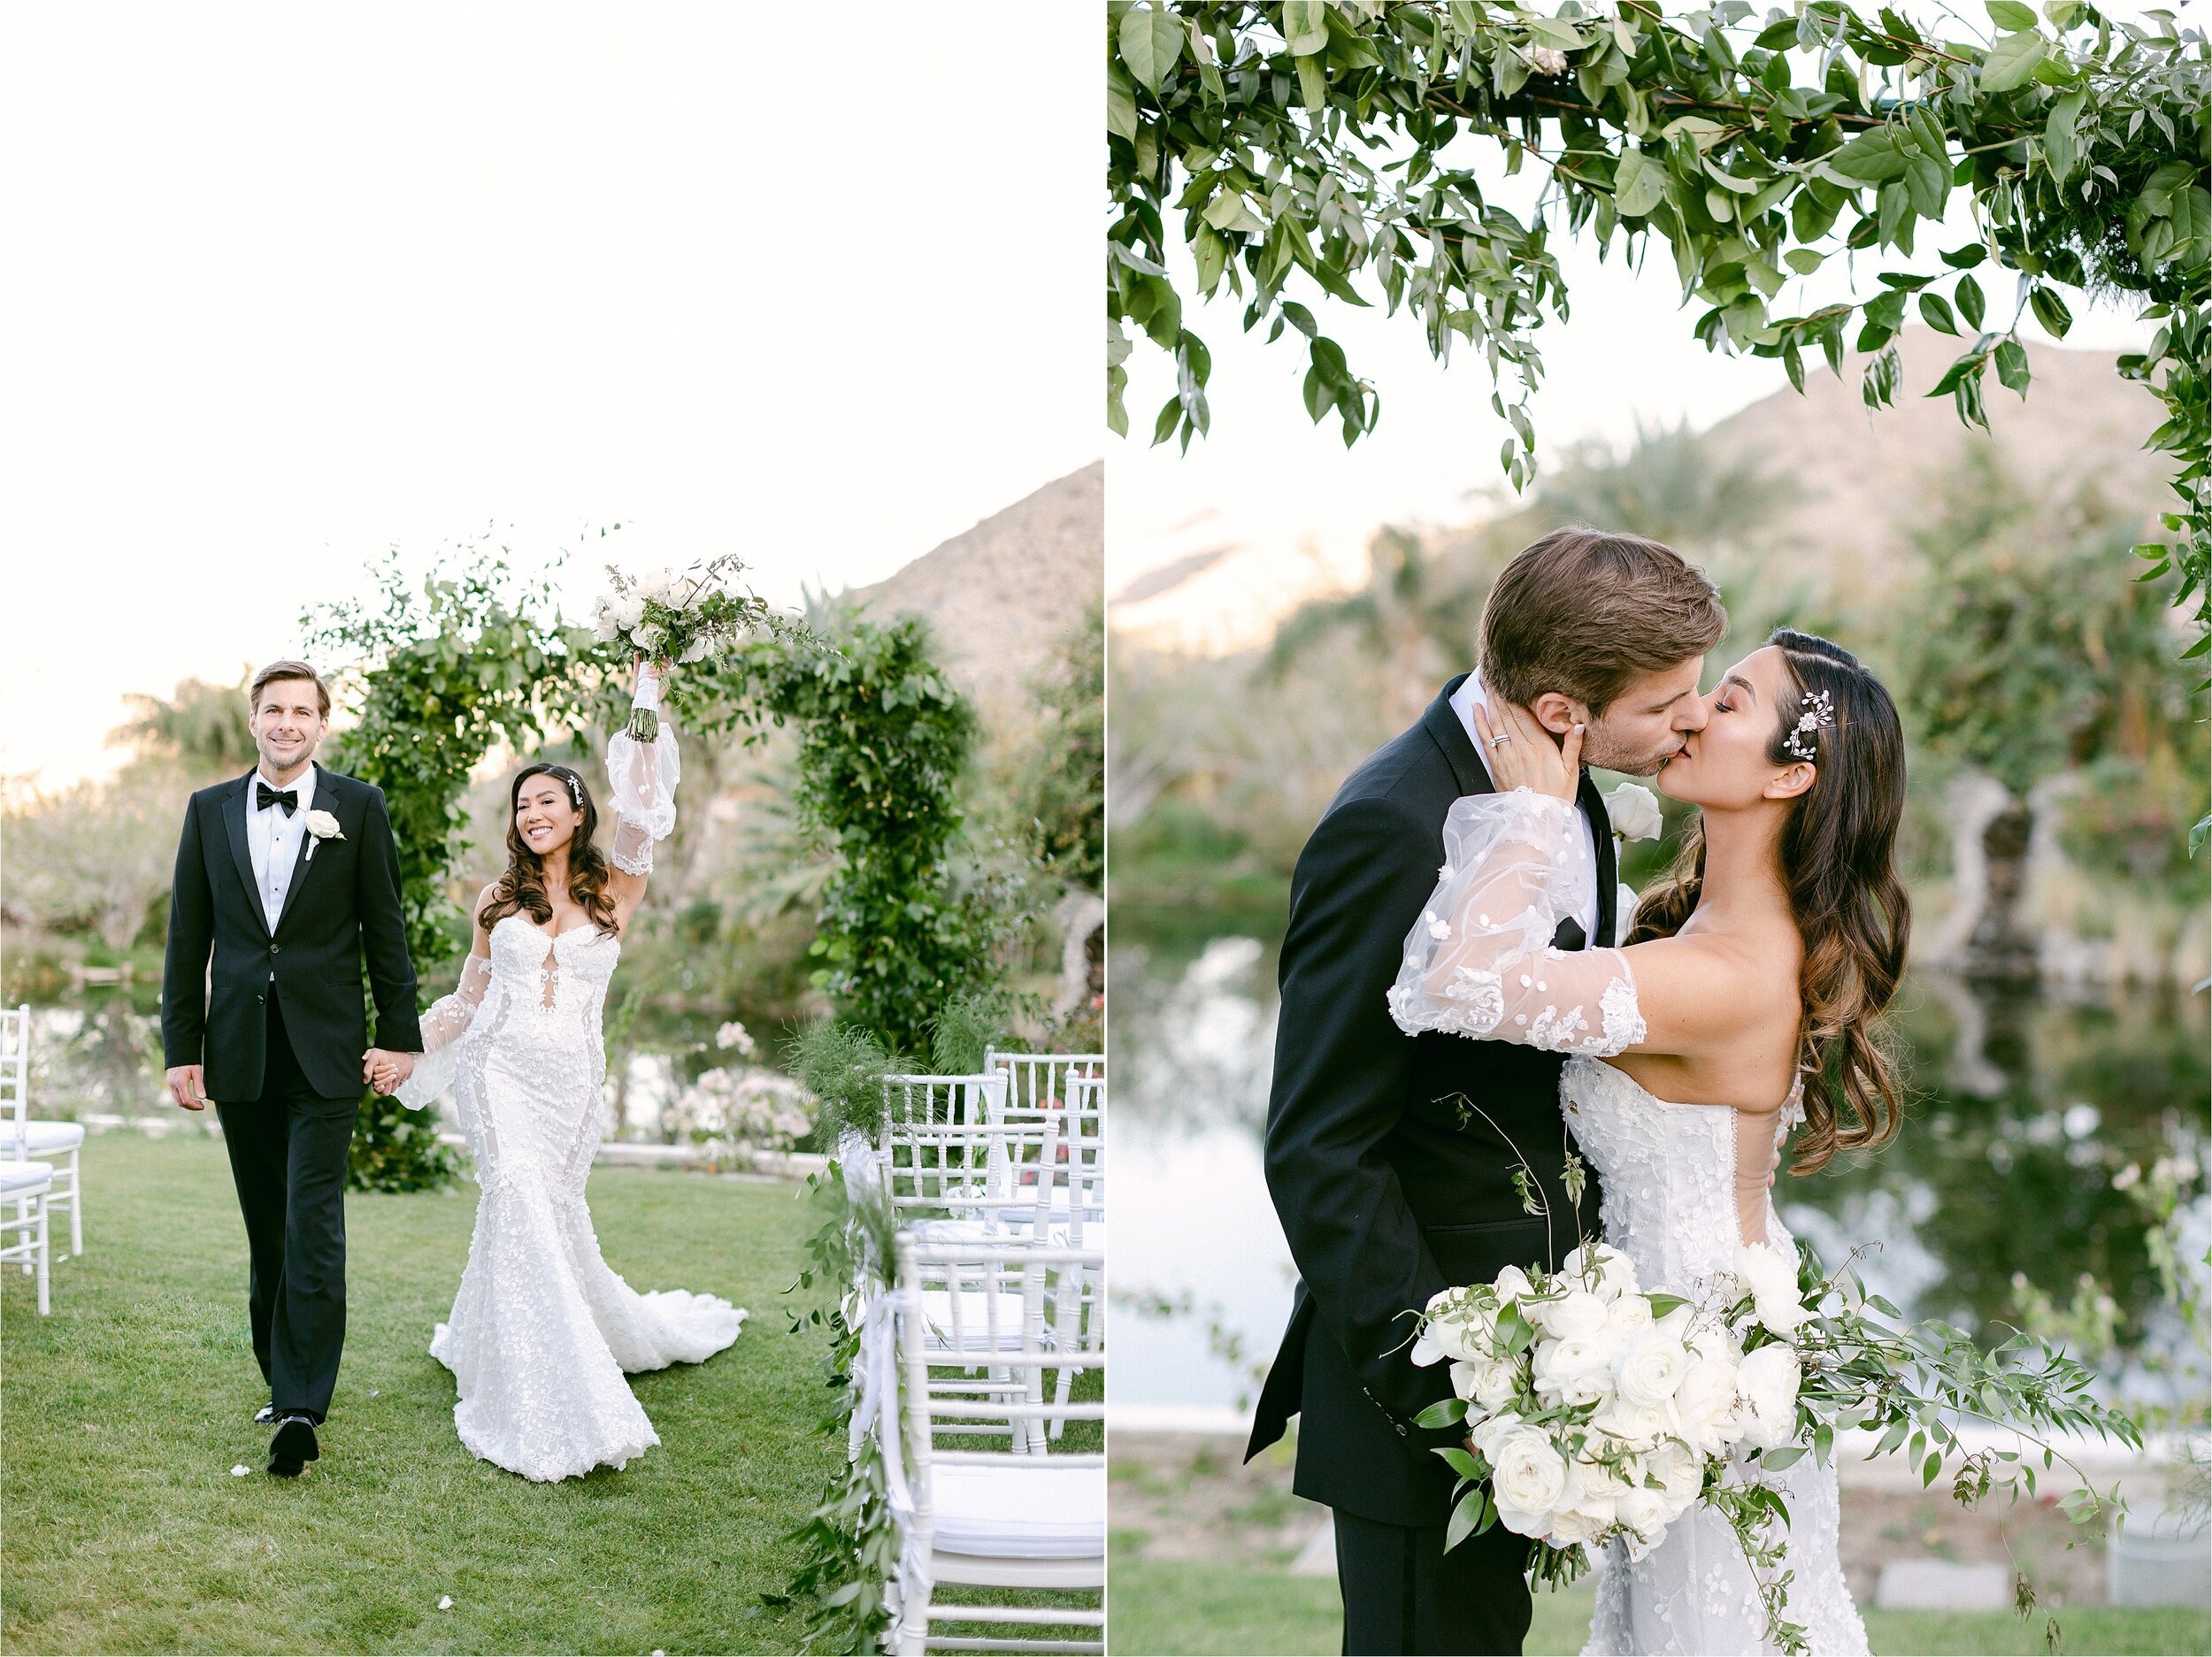 Private estate destination wedding venue in Palm Springs California.  Bride and groom exit ceremony holding hands and celebrating with a kiss.